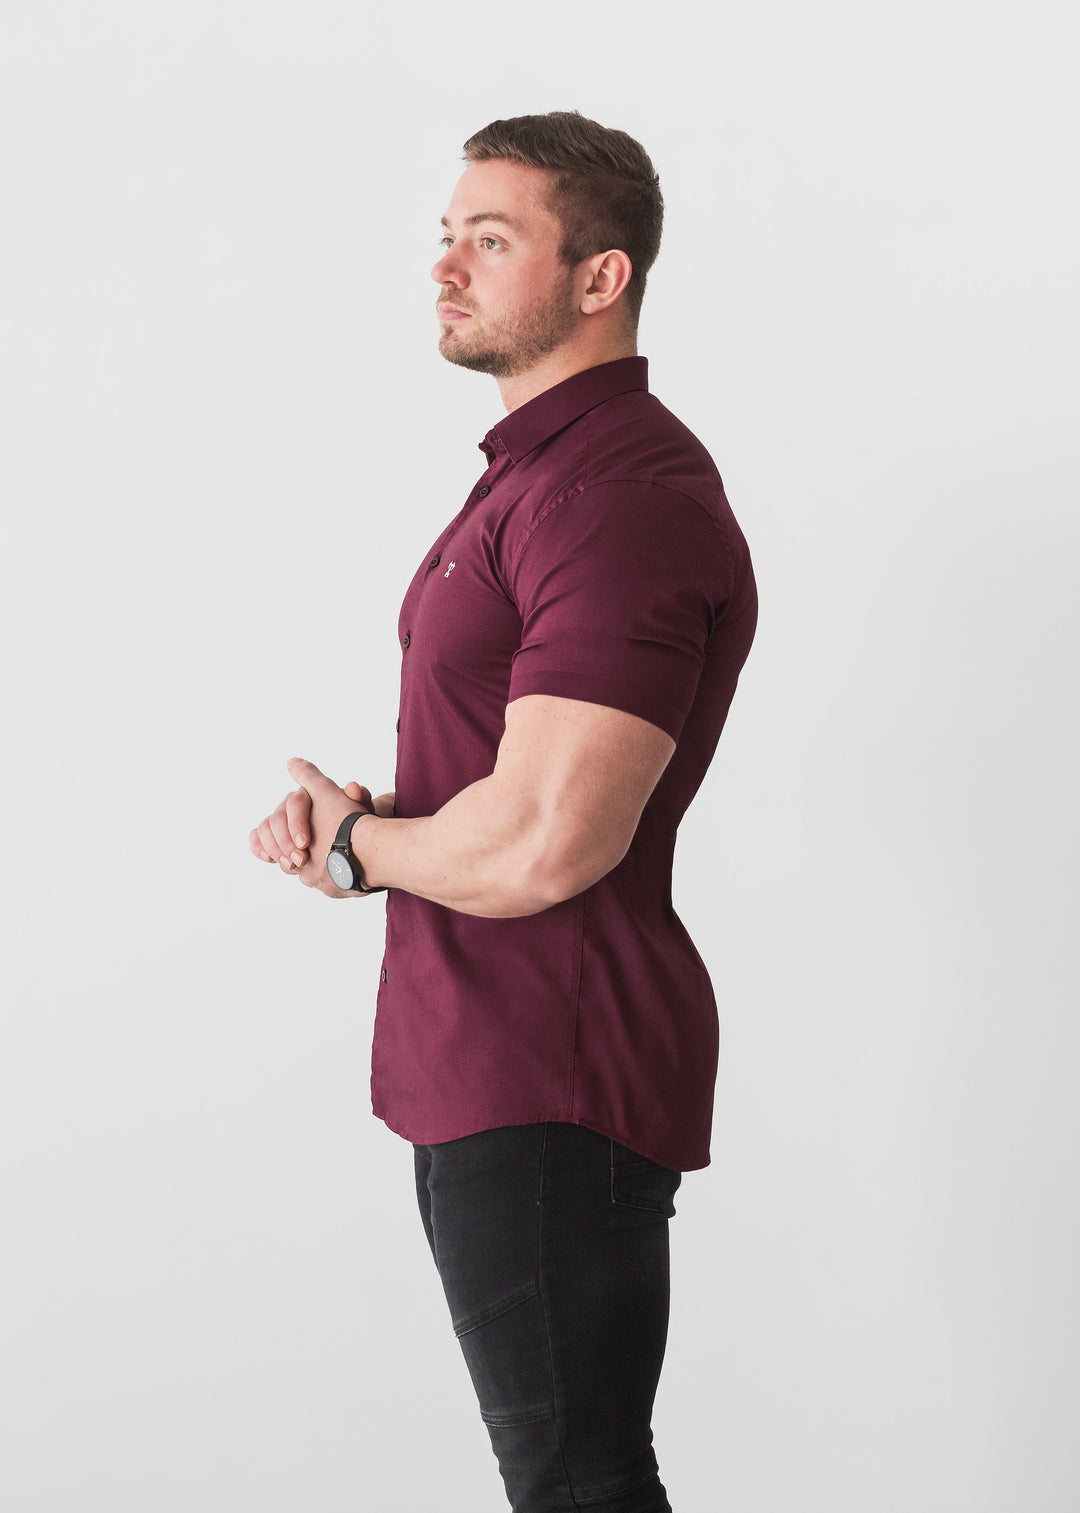 Short Sleeve Tapered Fit Shirt For Men. A Proportionally Fitted and Comfortable Short Sleeve Burgundy Muscle Fit Shirt. The Best Shirts For a Muscular Build.